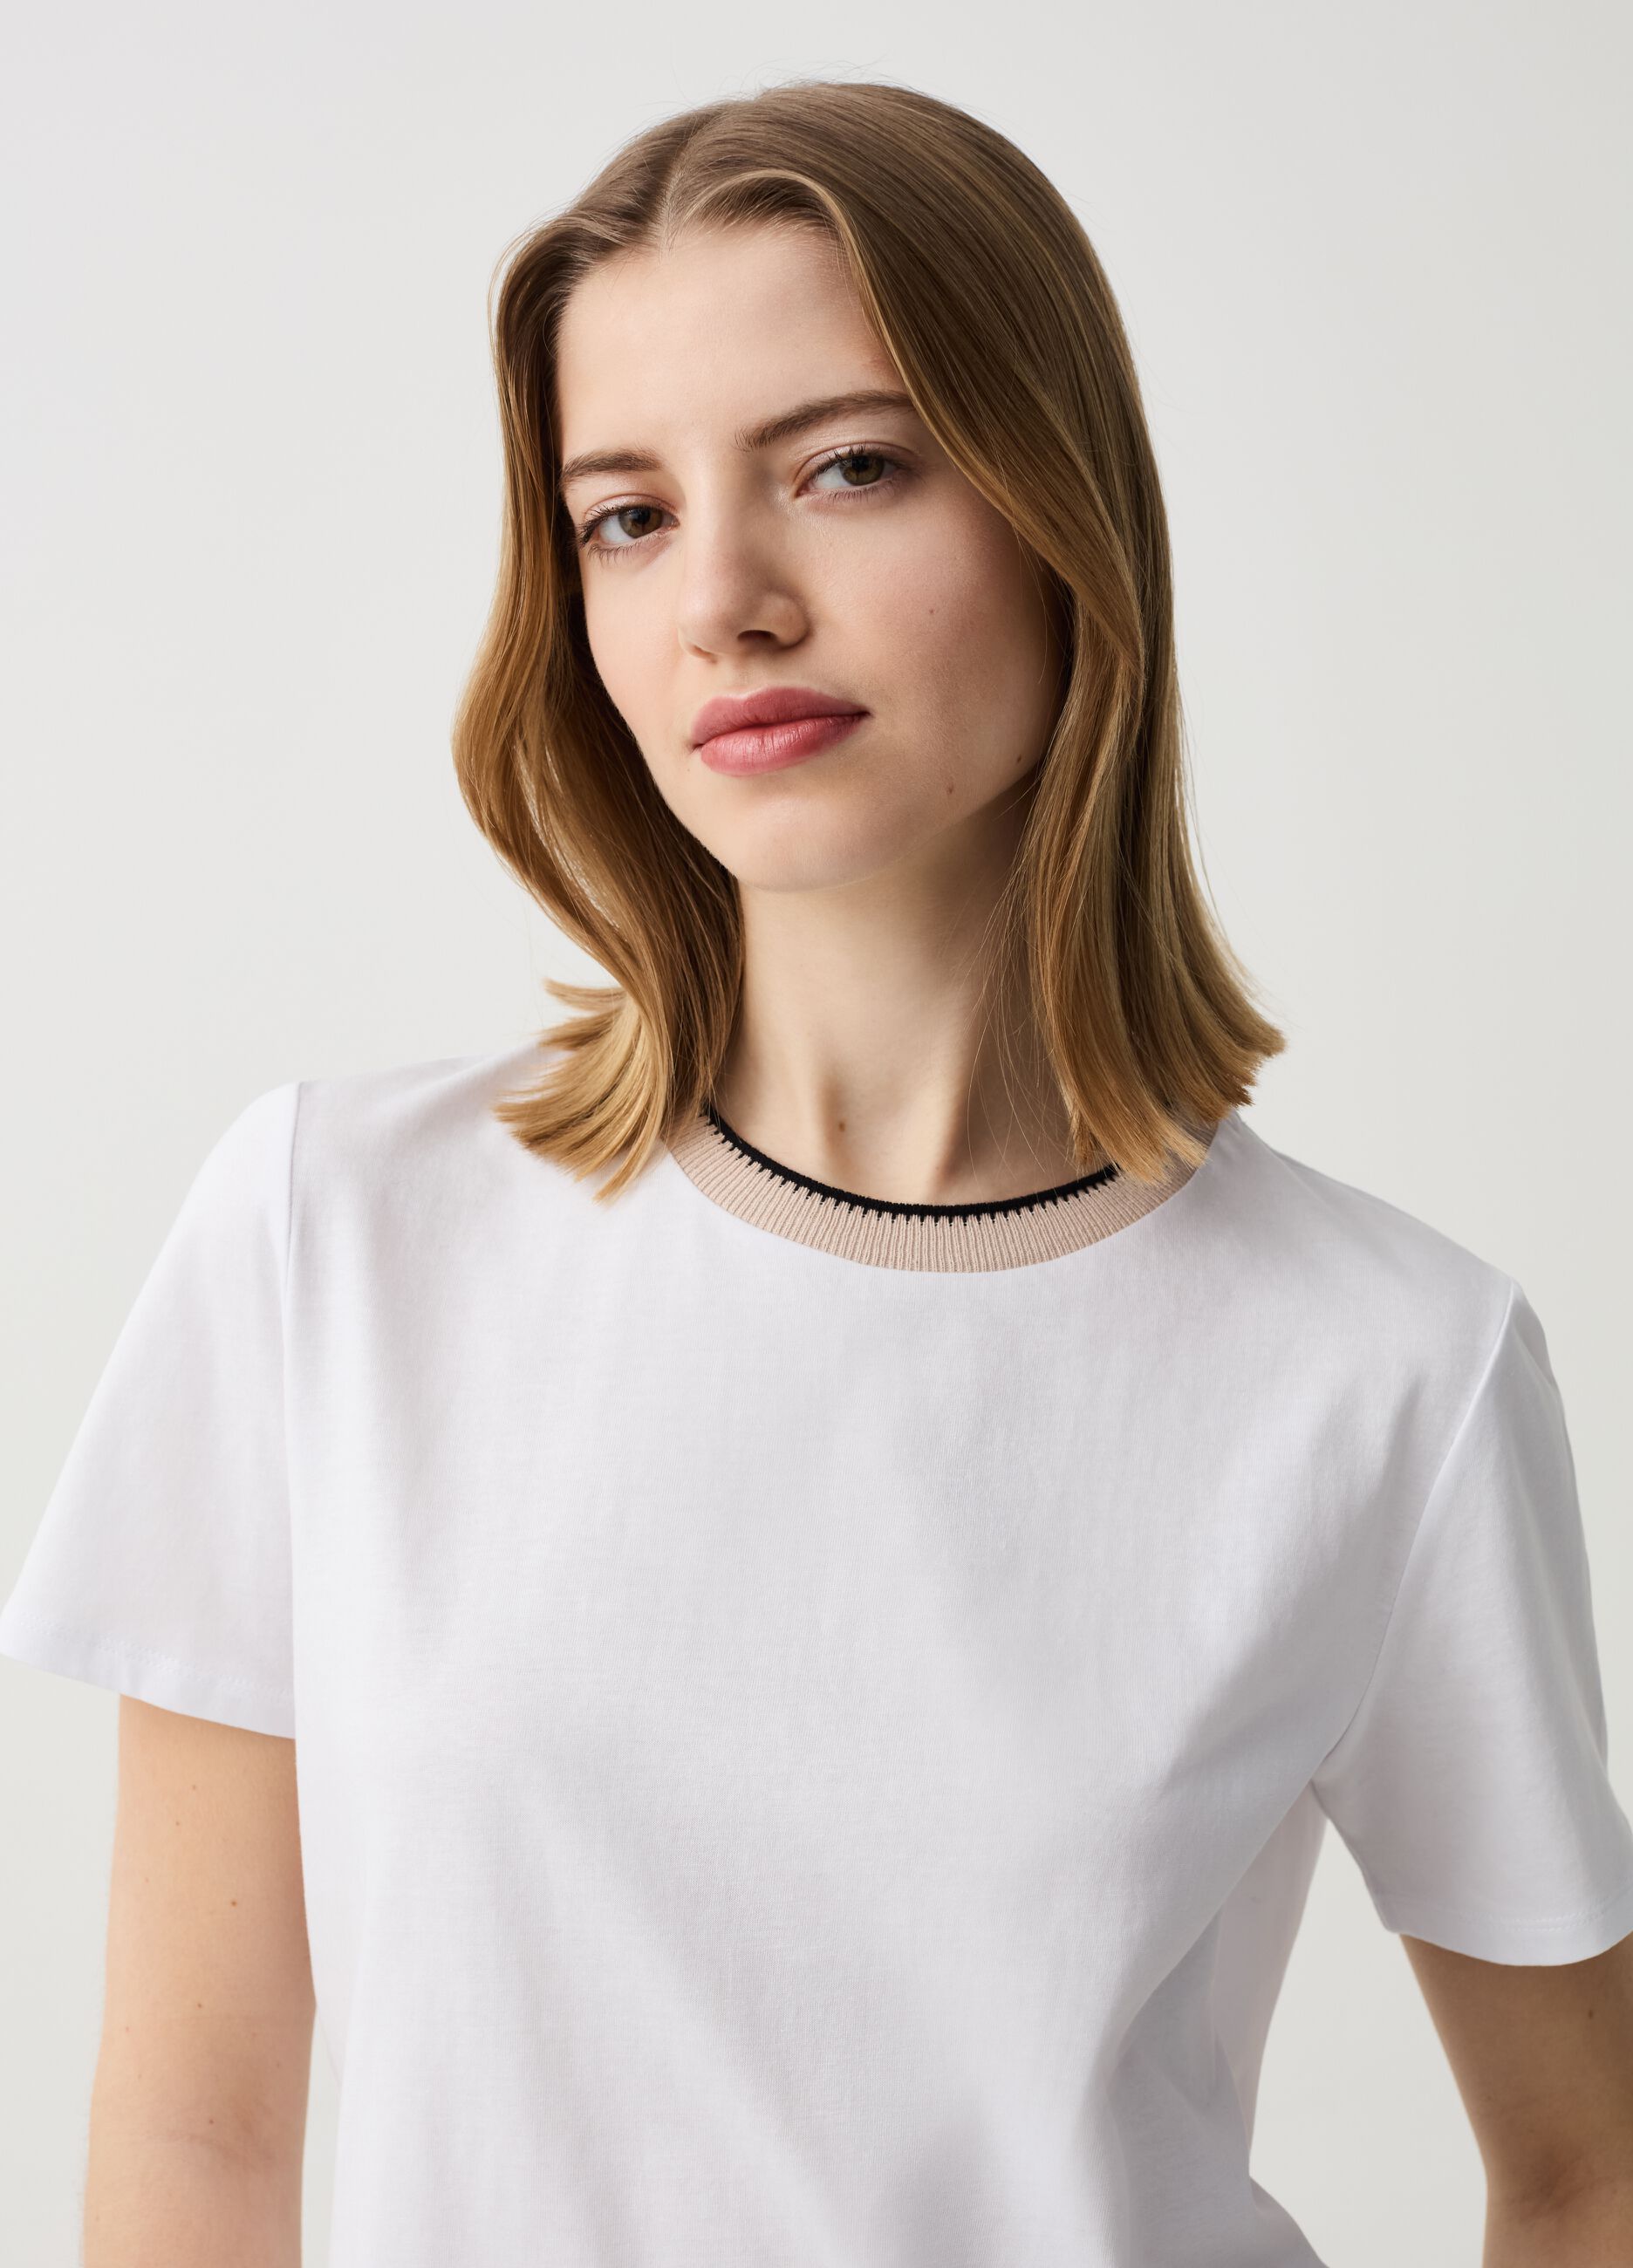 T-shirt with round neck with striped edging